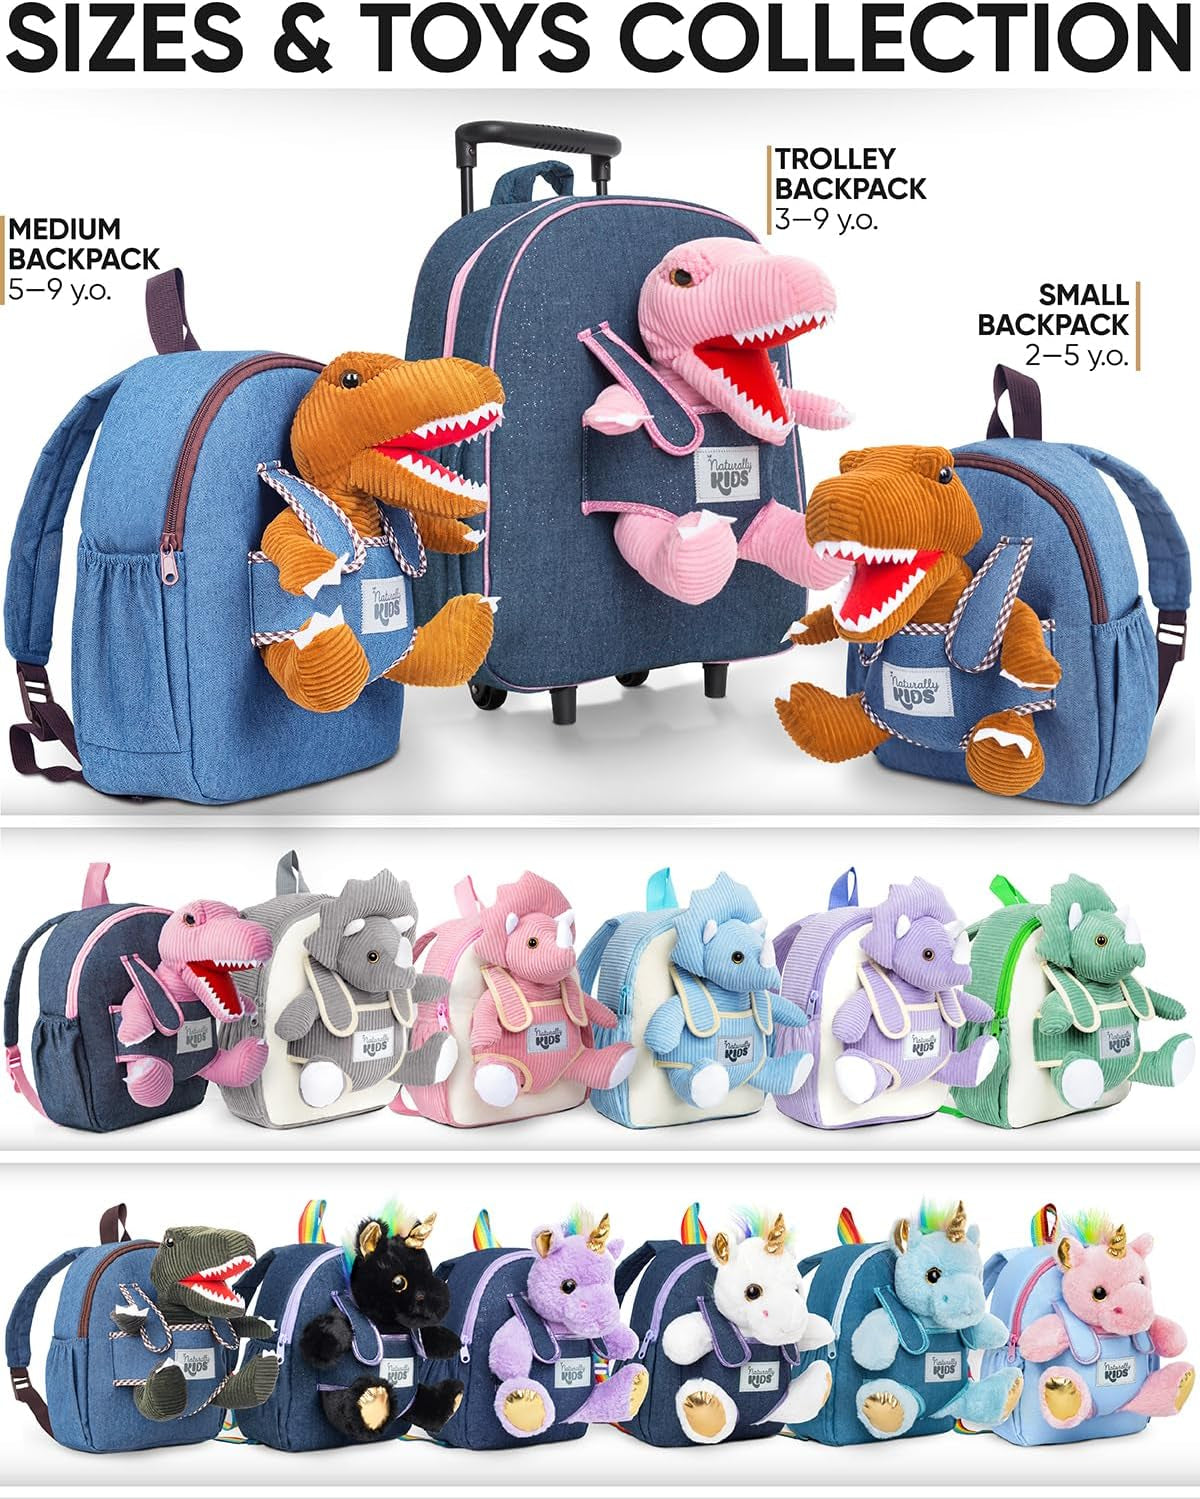 Dinosaur Backpack - Dinosaur Toys for Kids 3-5 - Kids Suitcase for Girl Boy W Stuffed Animal - Gifts for 7 Year Old - W Pockets & Reflective Logo - Rolling Backpack W Pink Triceratops